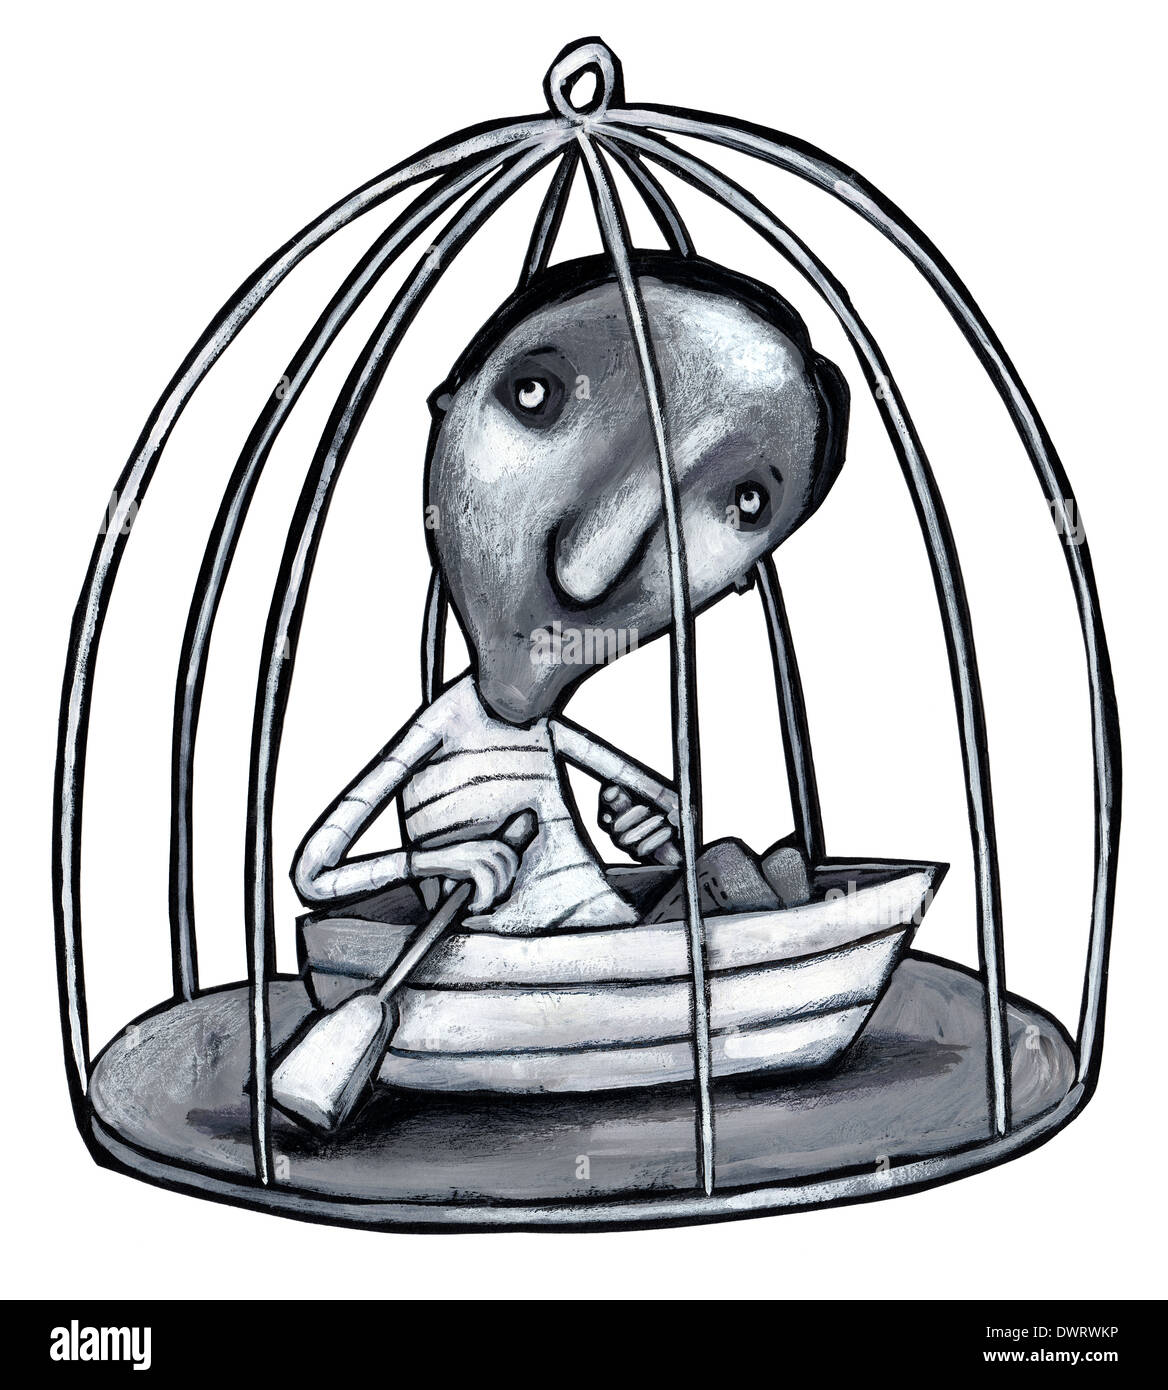 Illustrative image of man with boat in cage representing bondage Stock Photo